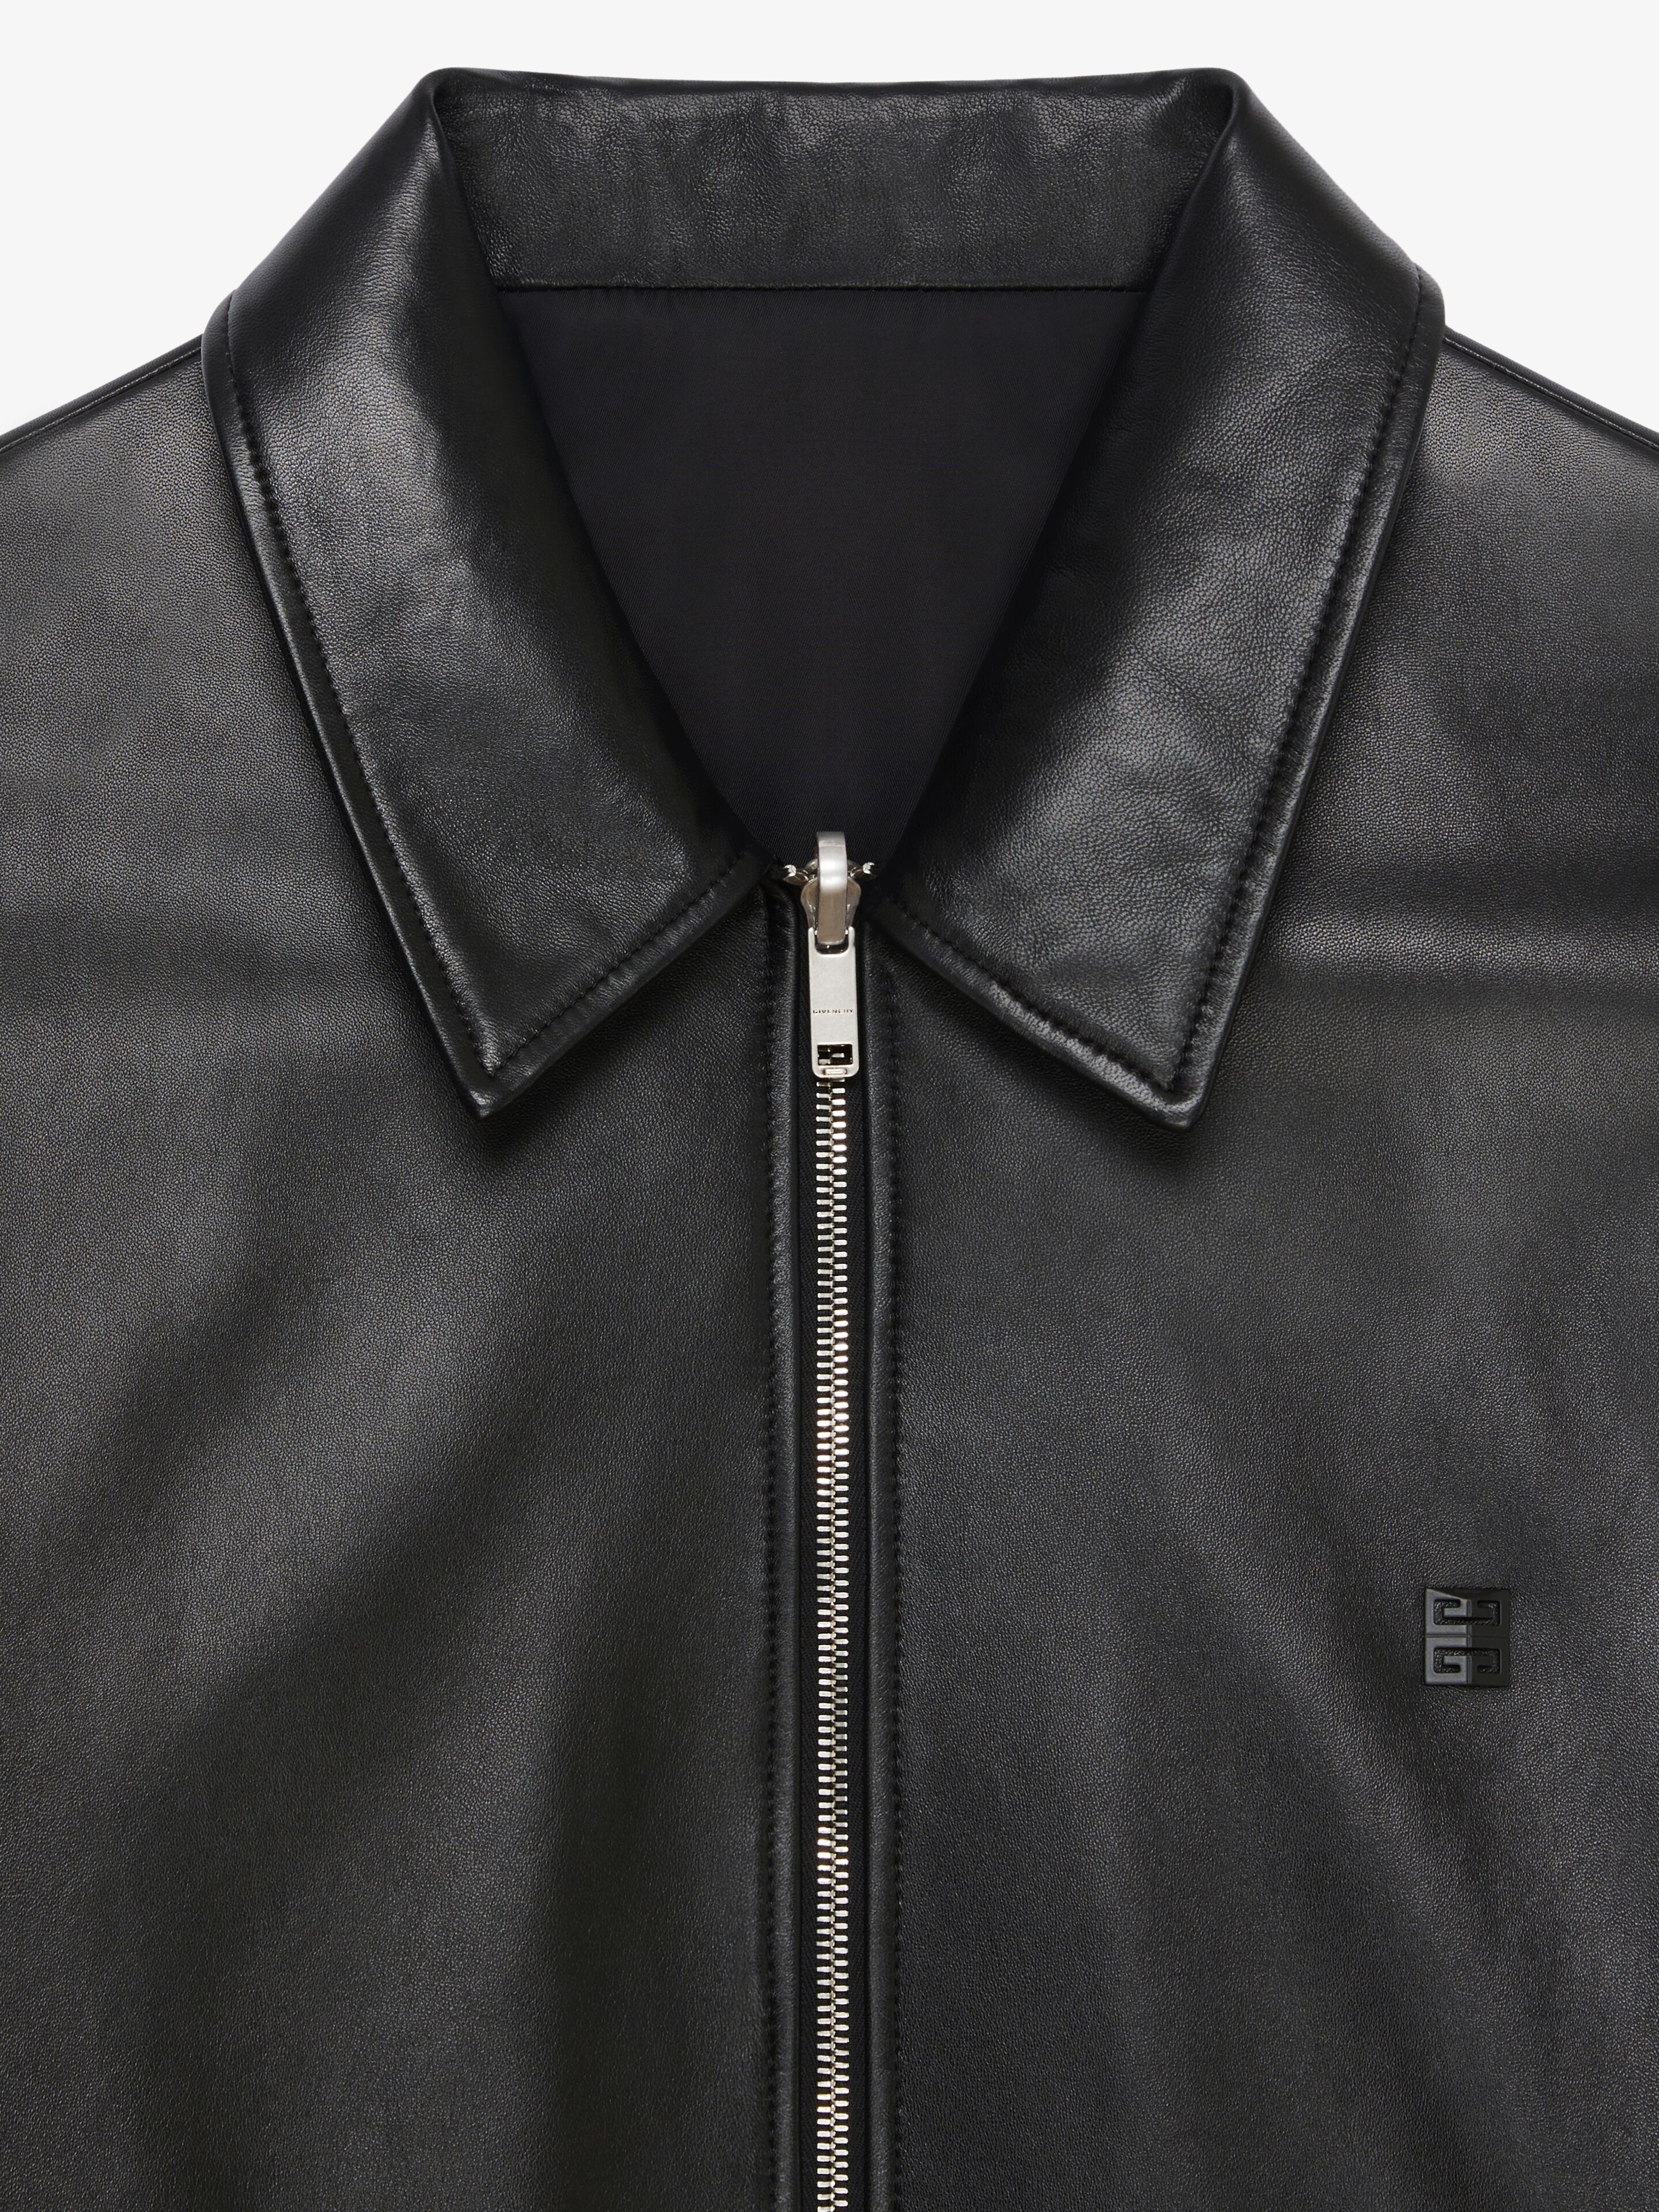 REVERSIBLE BOMBER JACKET IN LEATHER - 6